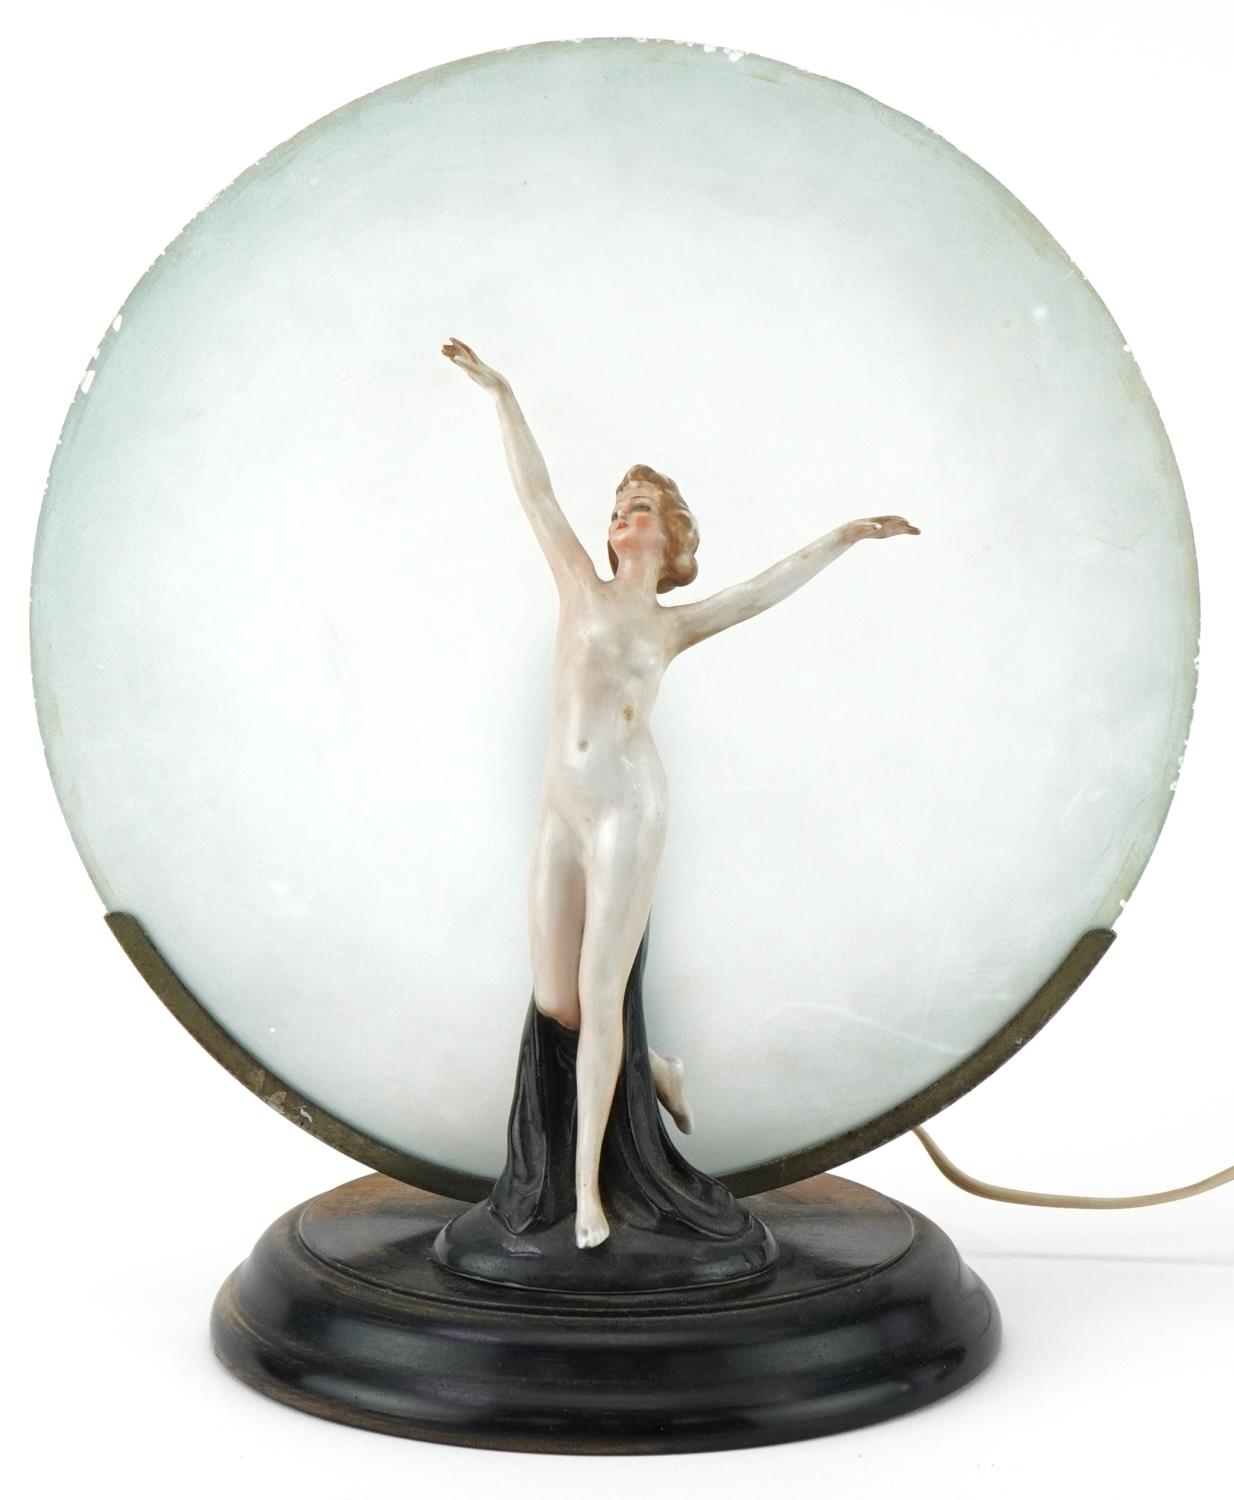 Art Deco porcelain table lamp of a nude female mounted on a wooden base with frosted glass shade, - Image 2 of 4